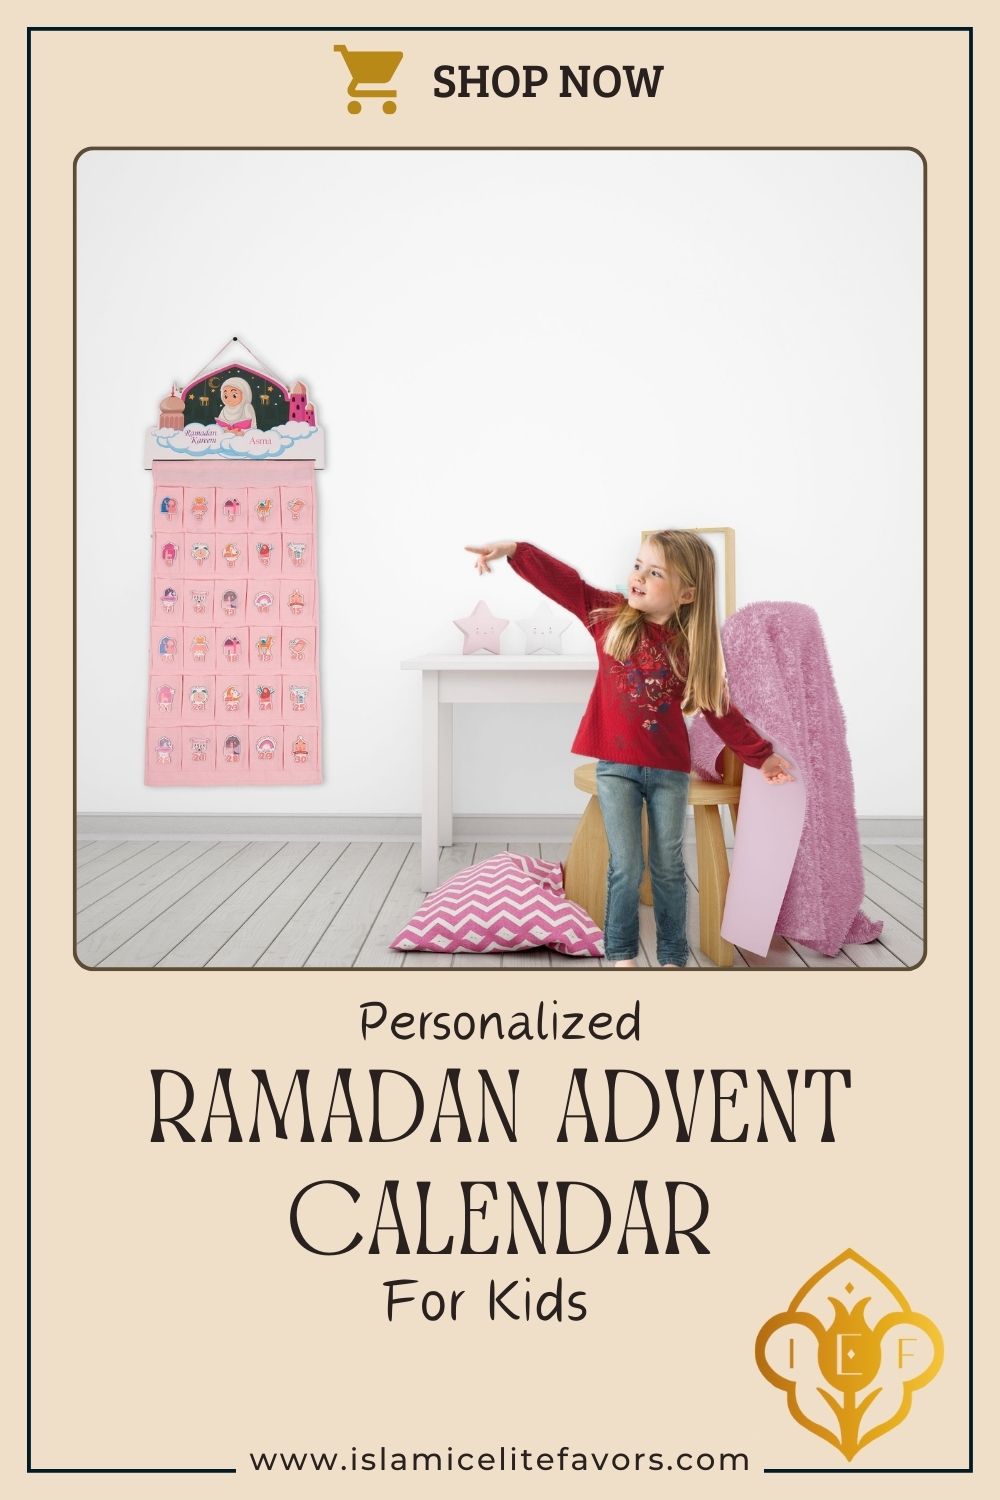 Personalized Fabric Canvas Ramadan Advent Calendar Countdown for Kids - Islamic Elite Favors is a handmade gift shop offering a wide variety of unique and personalized gifts for all occasions. Whether you're looking for the perfect Ramadan, Eid, Hajj, wedding gift or something special for a birthday, baby shower or anniversary, we have something for everyone. High quality, made with love.